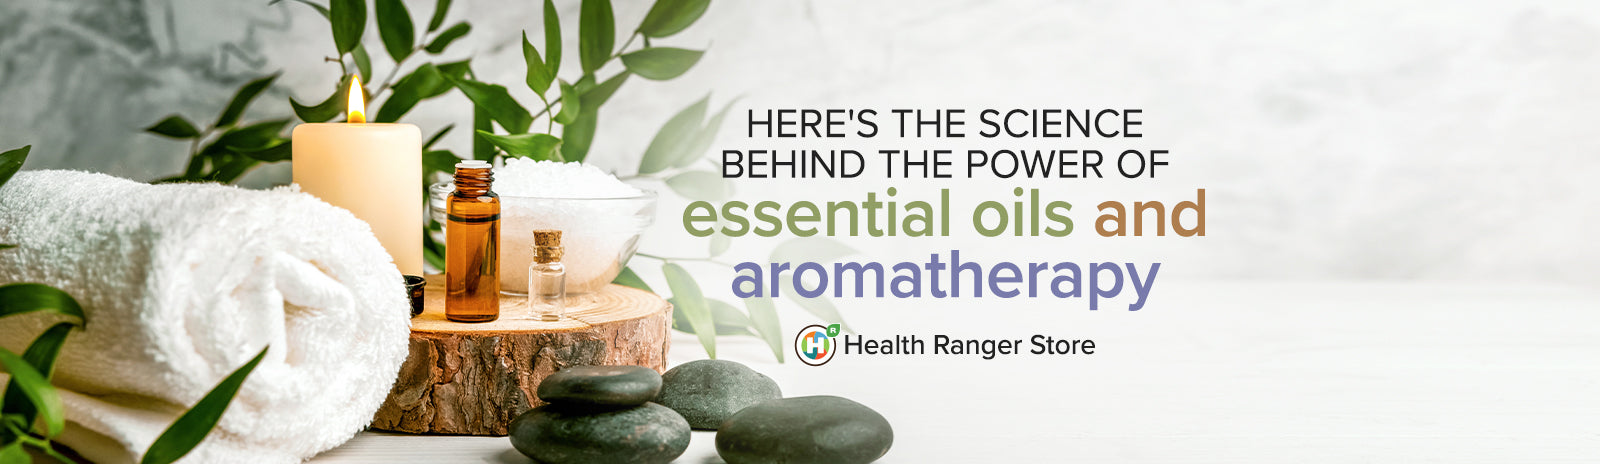 Here’s the science behind the power of essential oils and aromatherapy